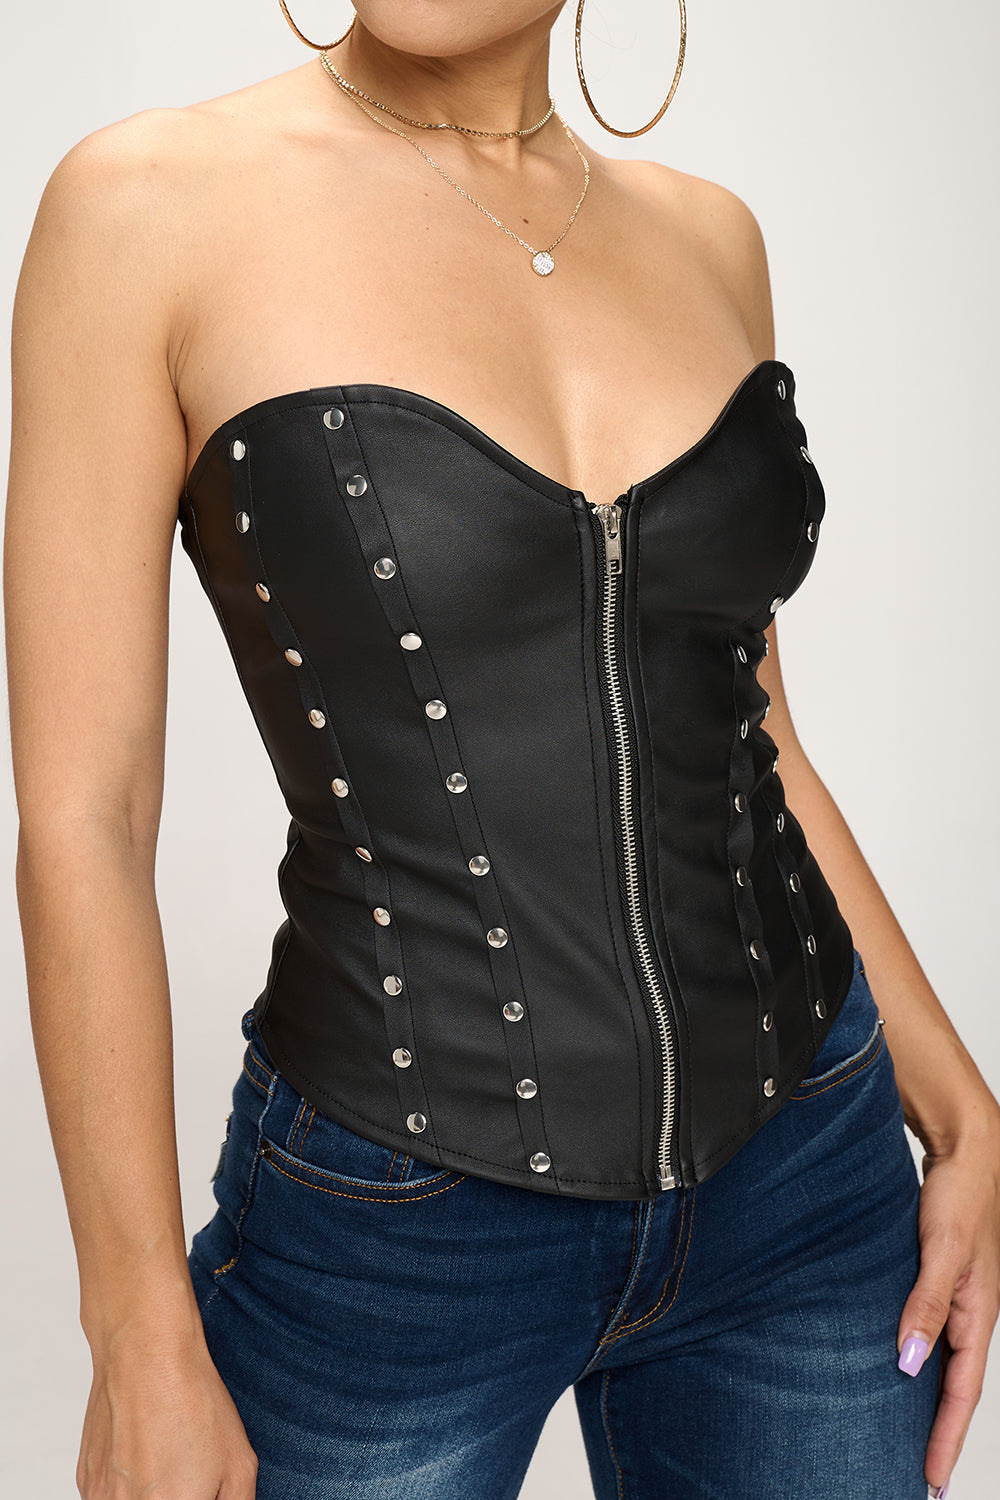 6 Buckle Zip Front Corset in Brown Leather VC1318R - Open Road Leather &  Accessories